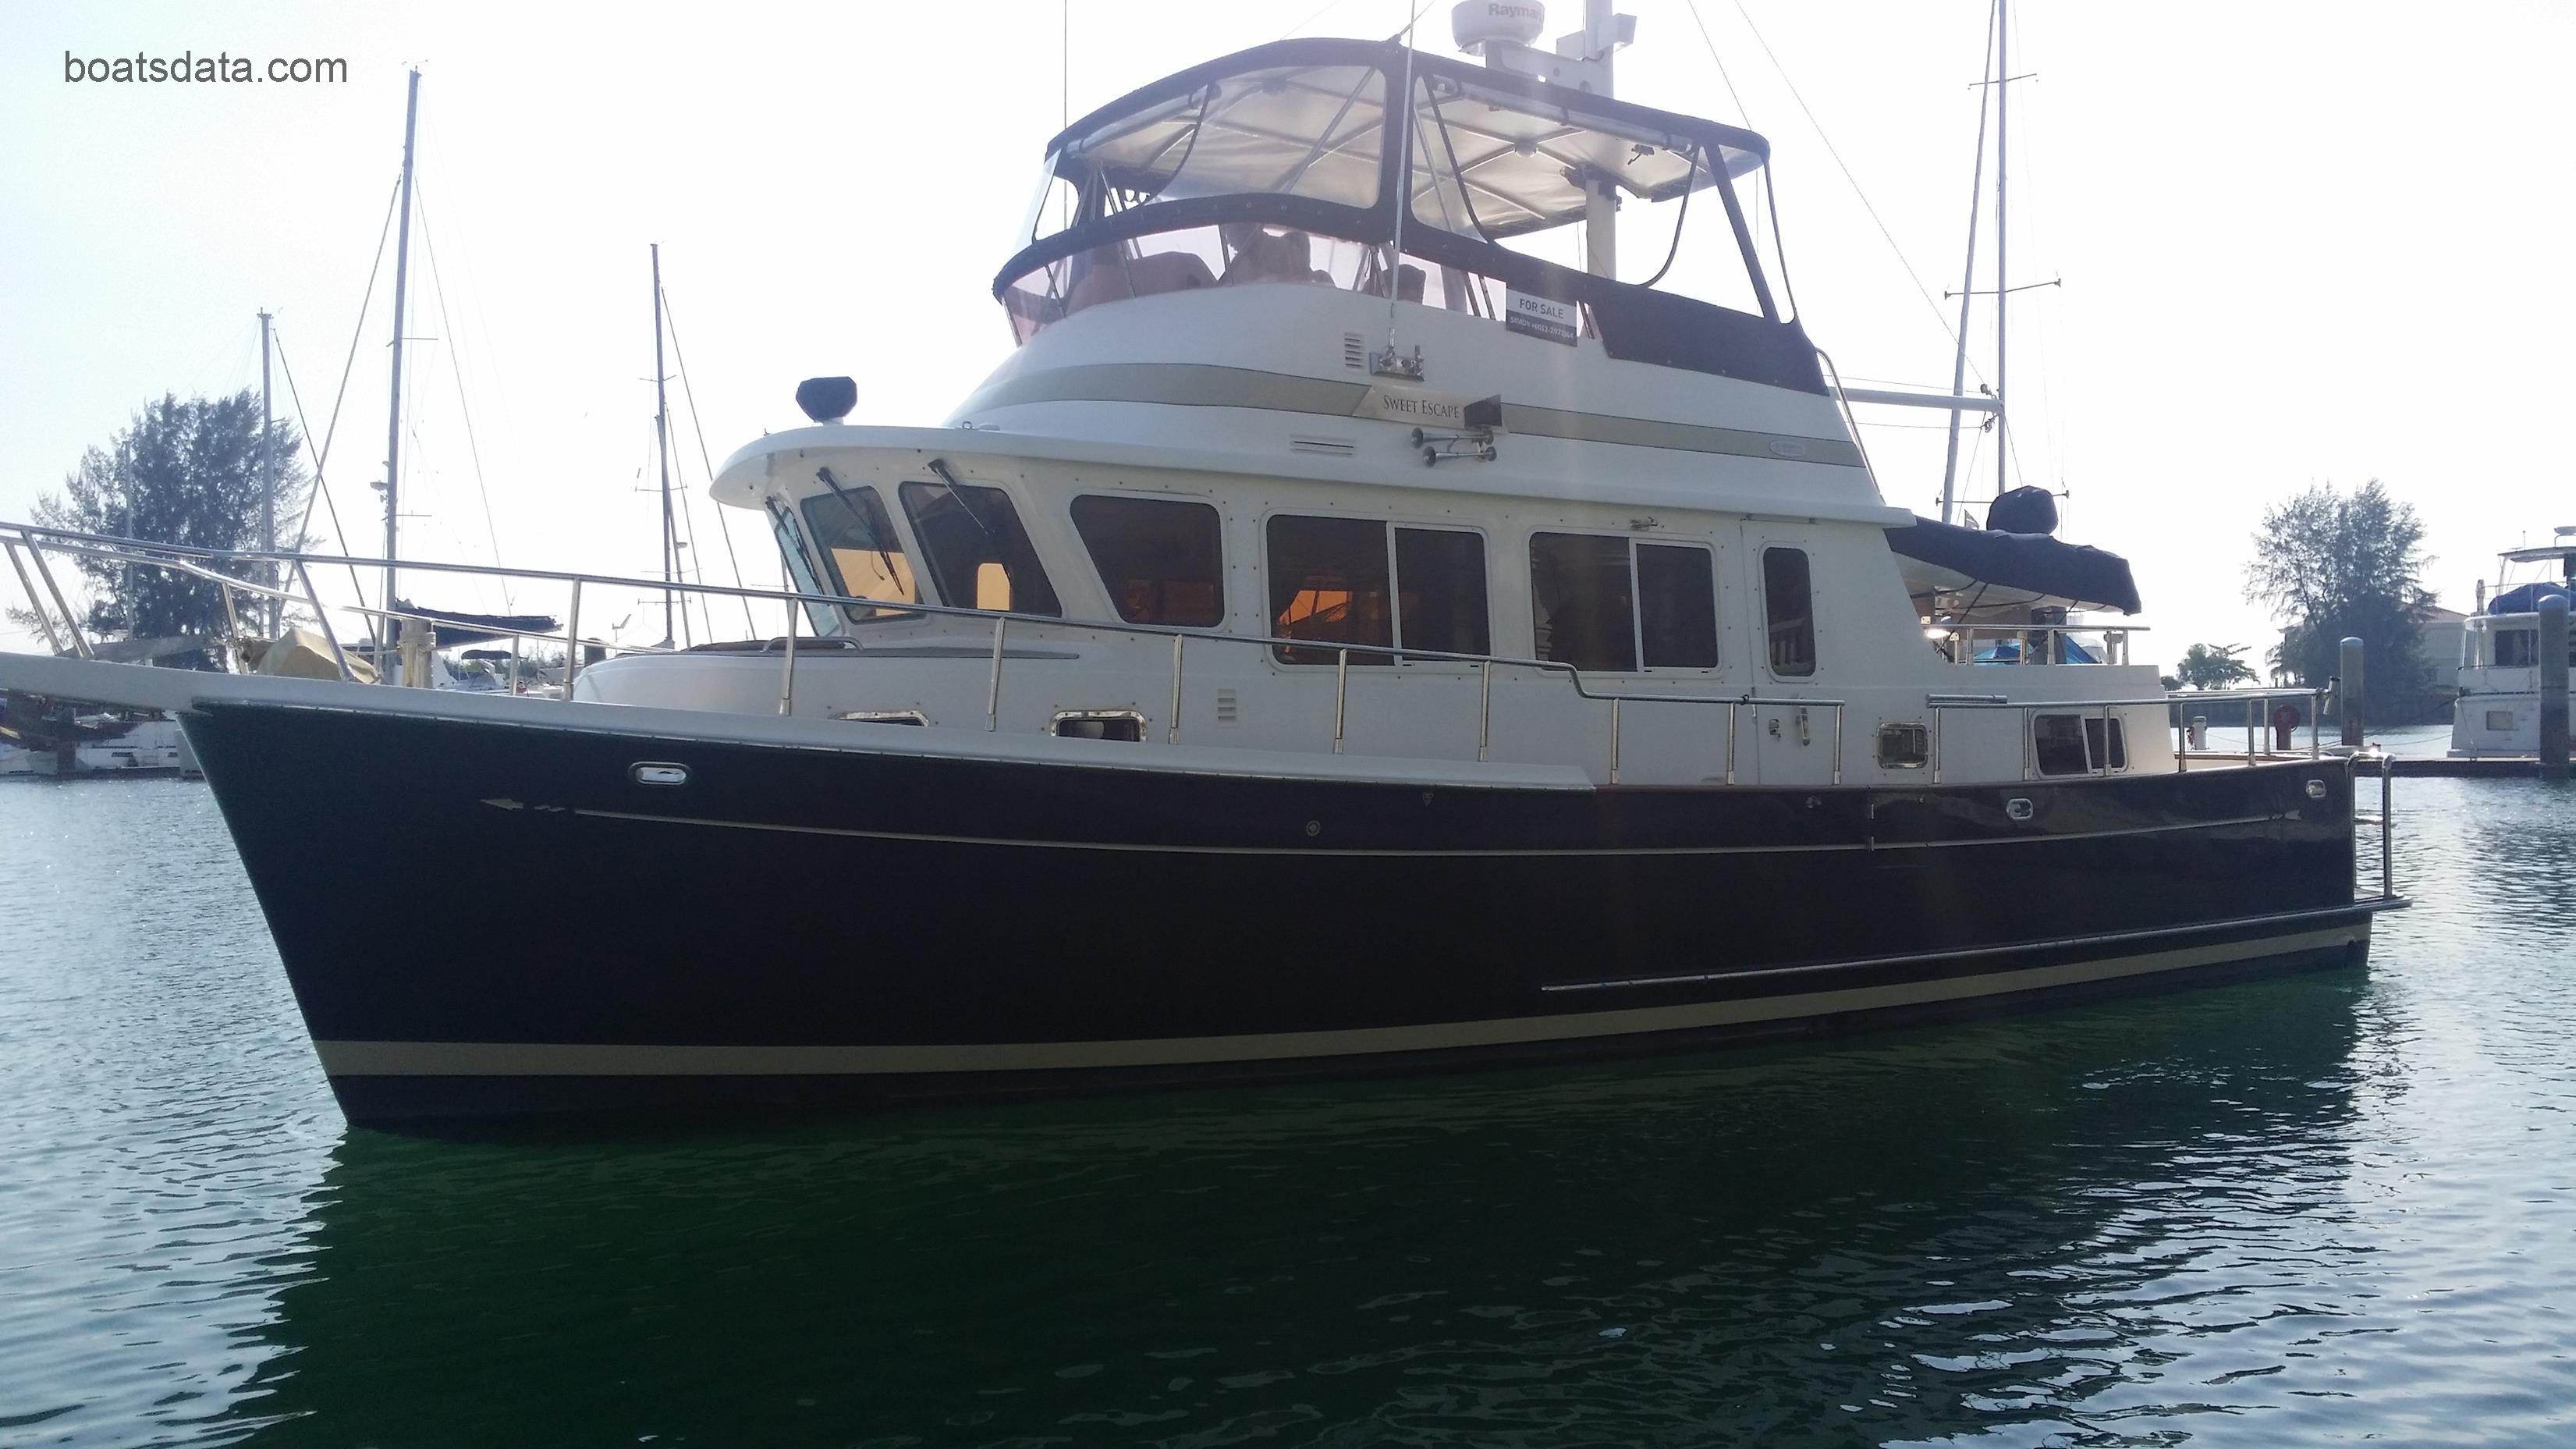 Selene 40 Ocean Trawler tv detailed specifications and features